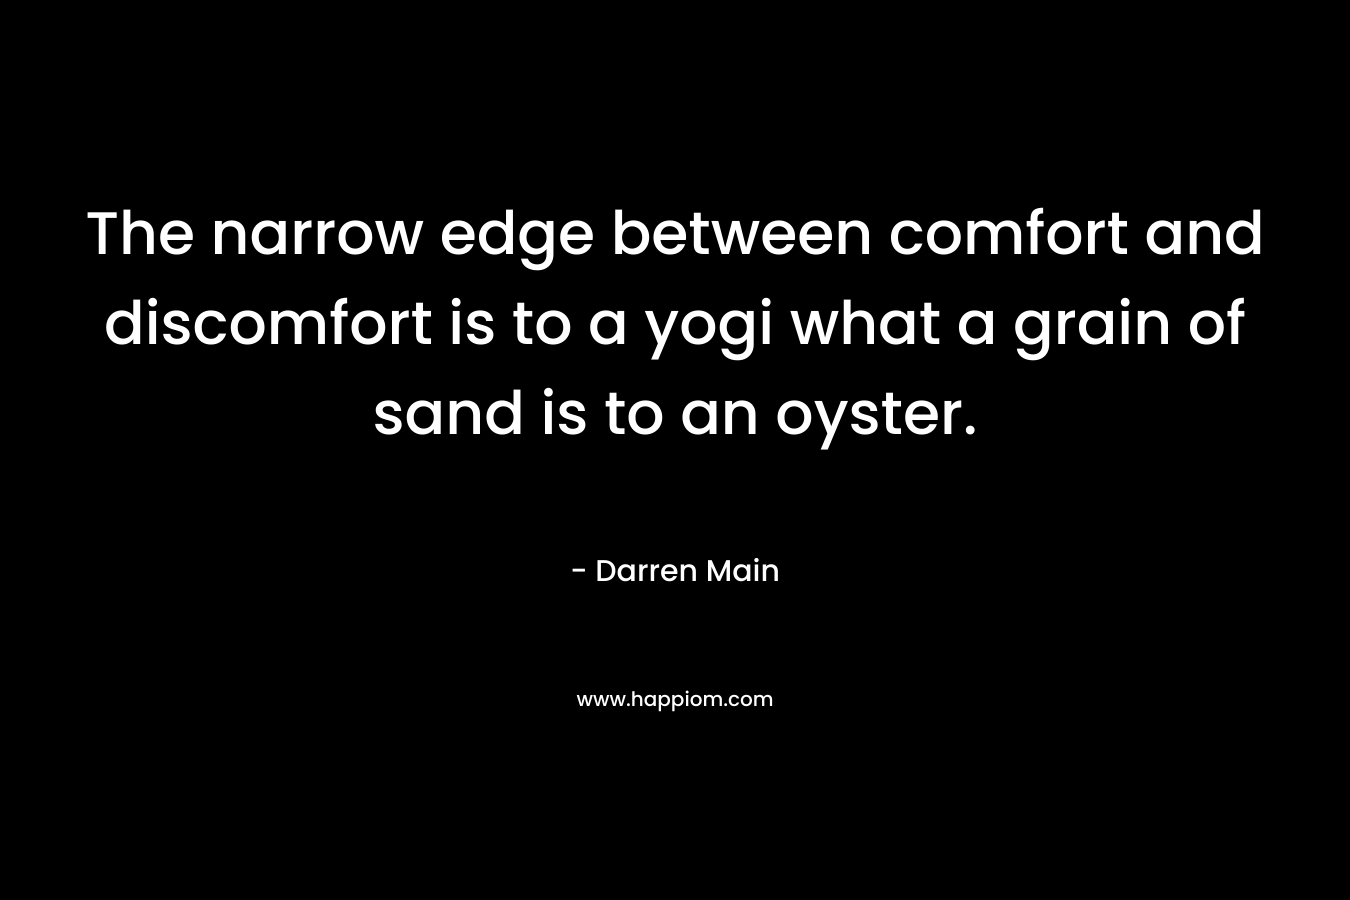 The narrow edge between comfort and discomfort is to a yogi what a grain of sand is to an oyster. – Darren Main